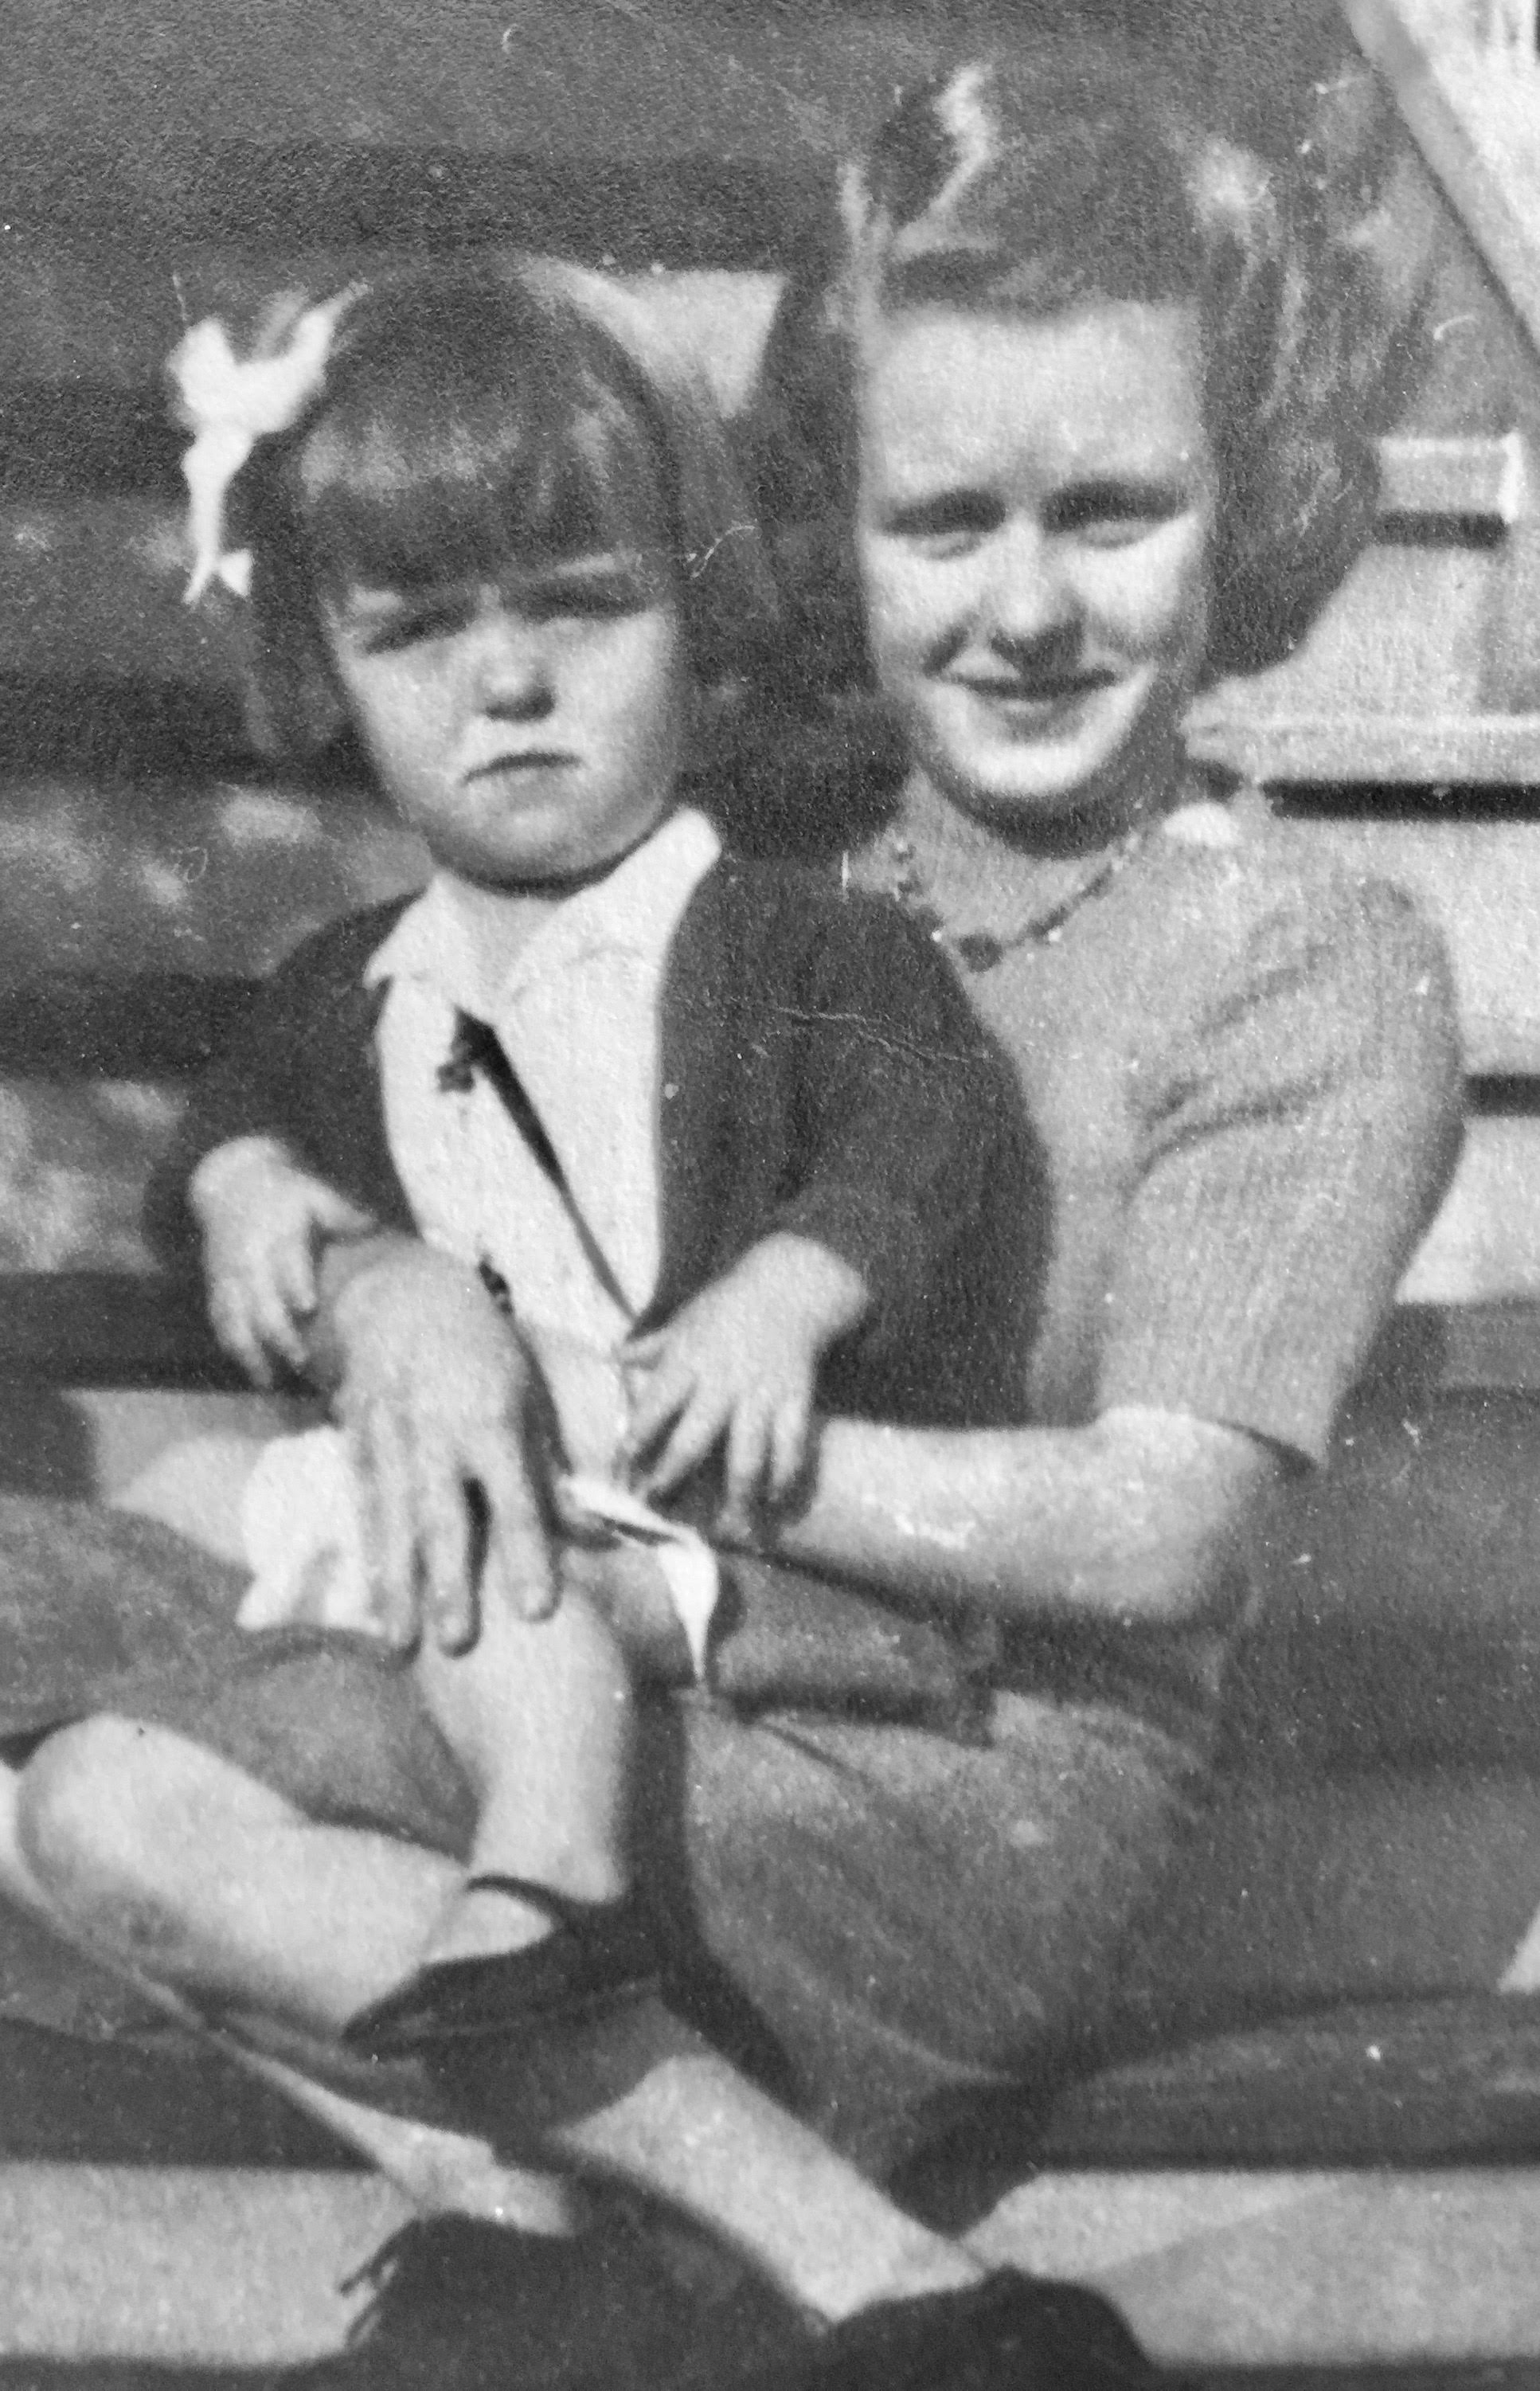 Carmel as a child with her older sister Kathleen.